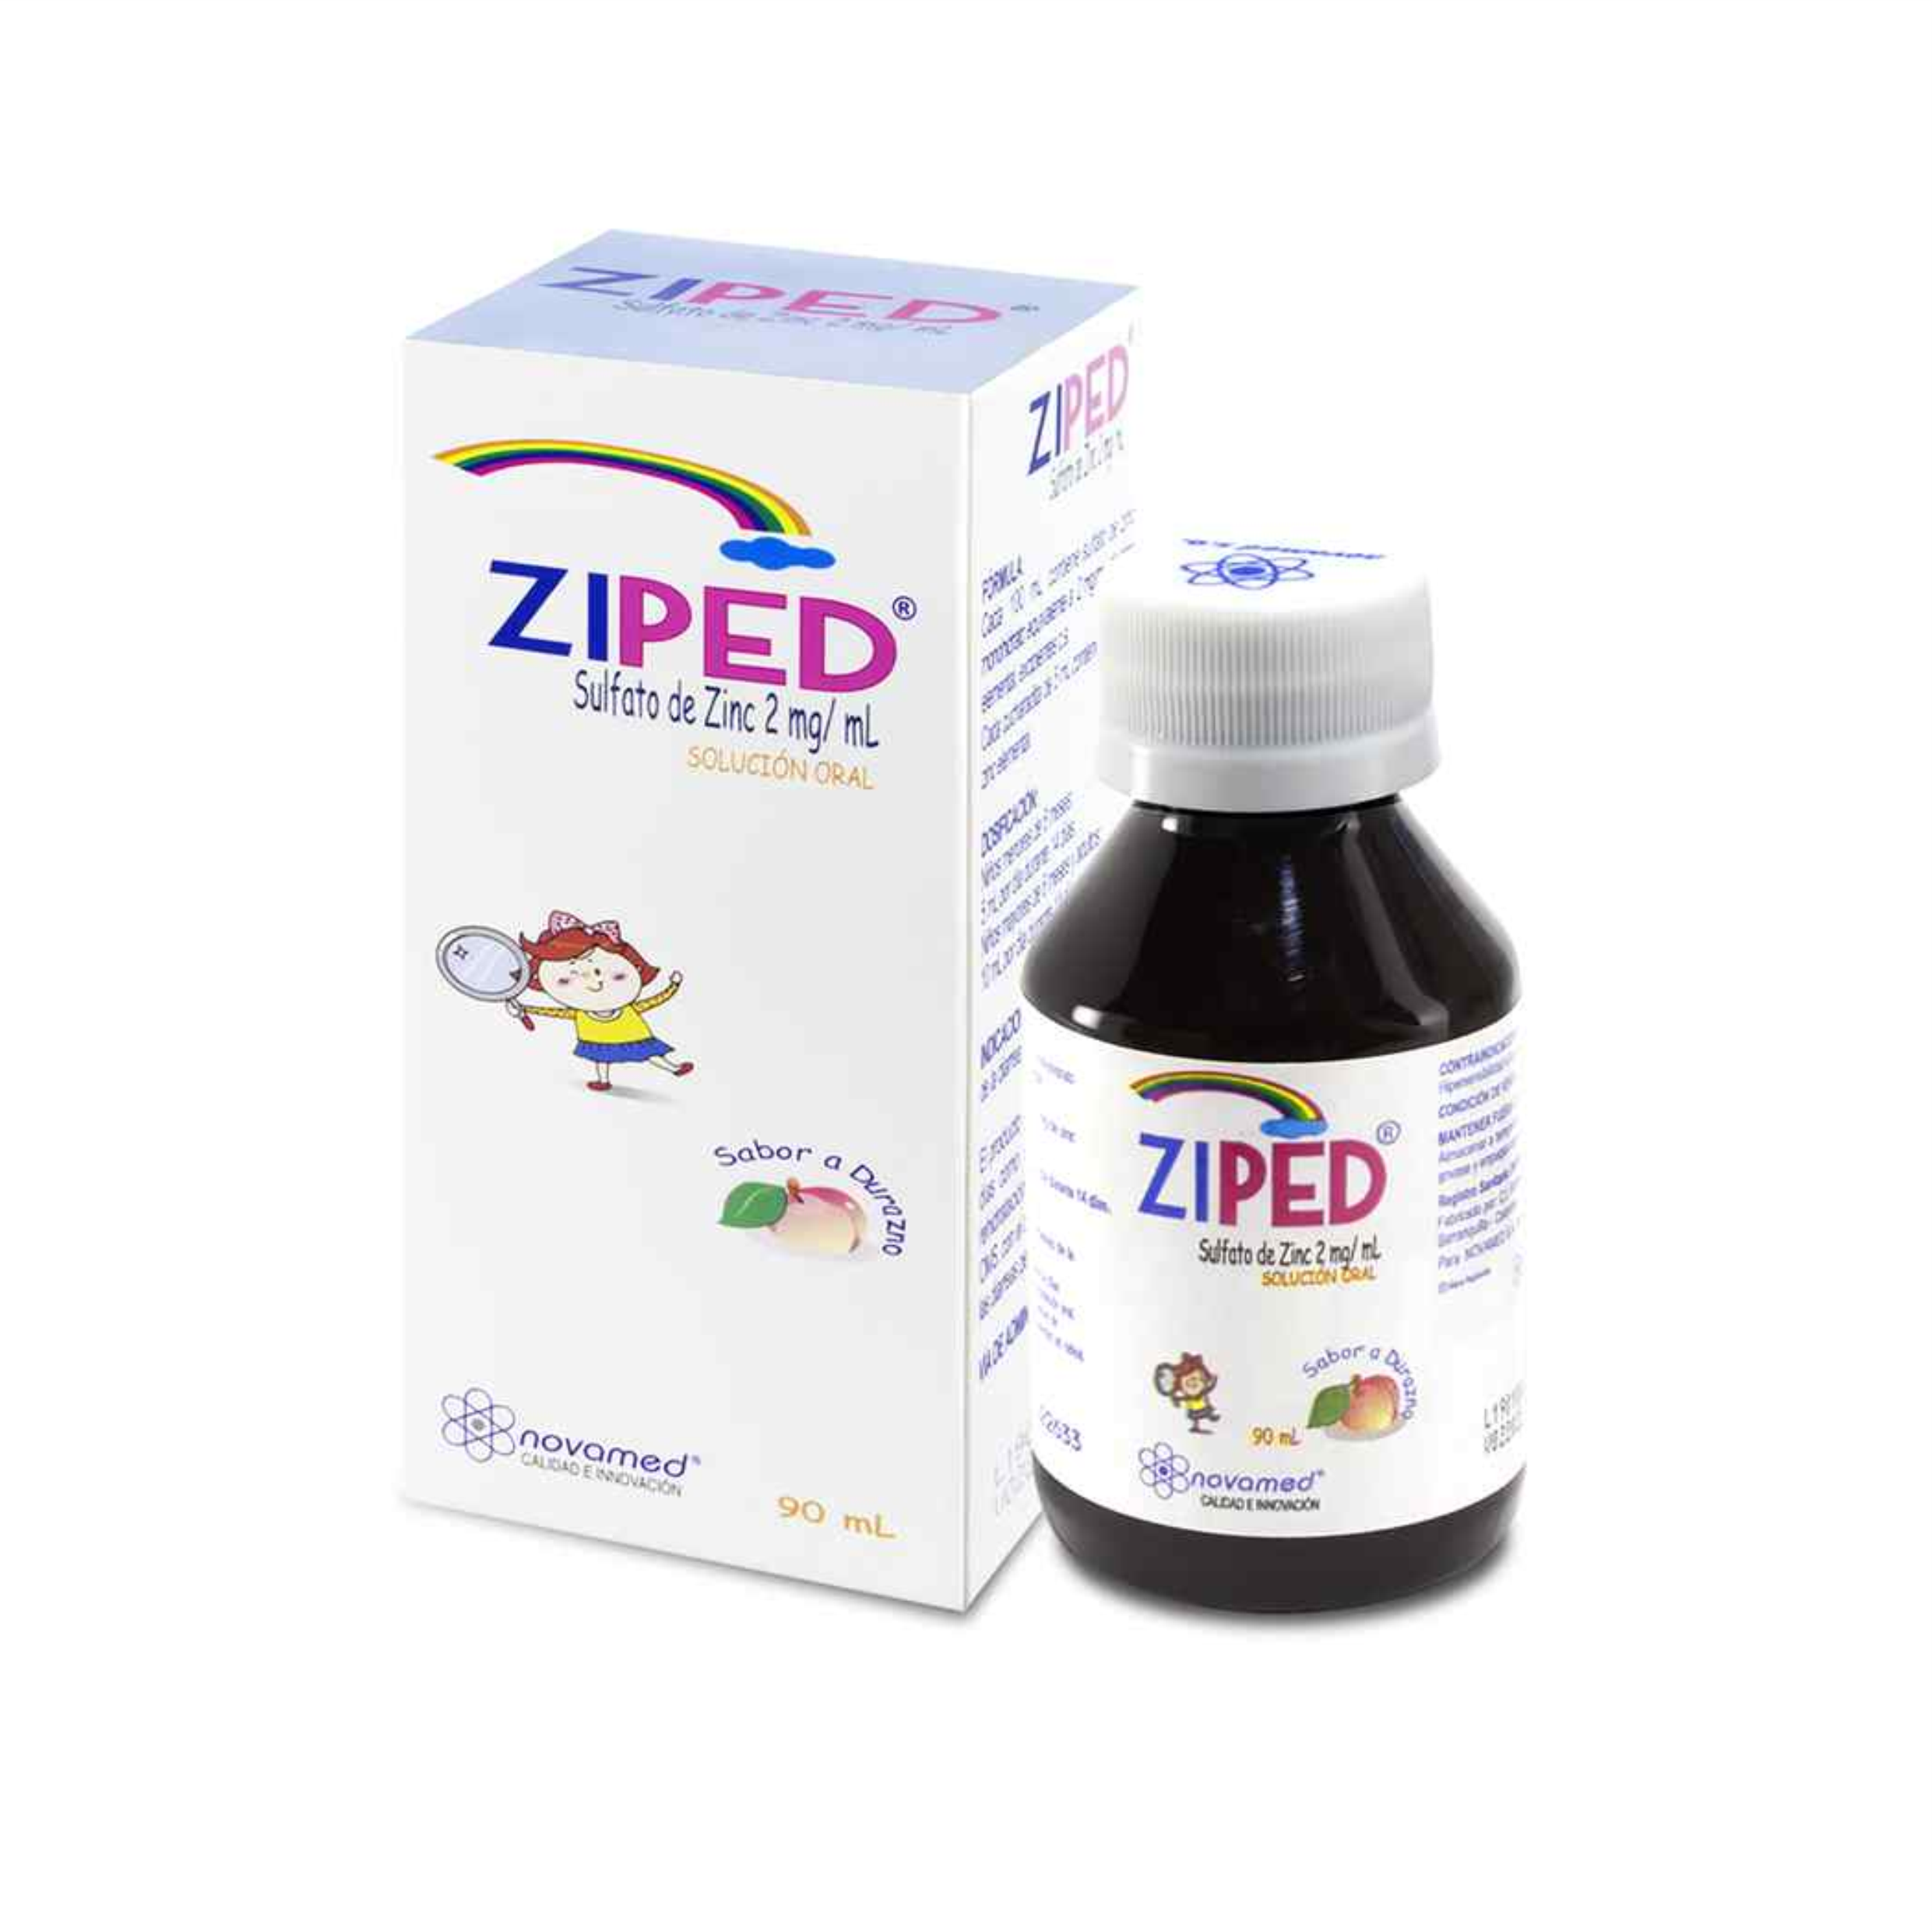 Ziped Solucion Oral 90 mL